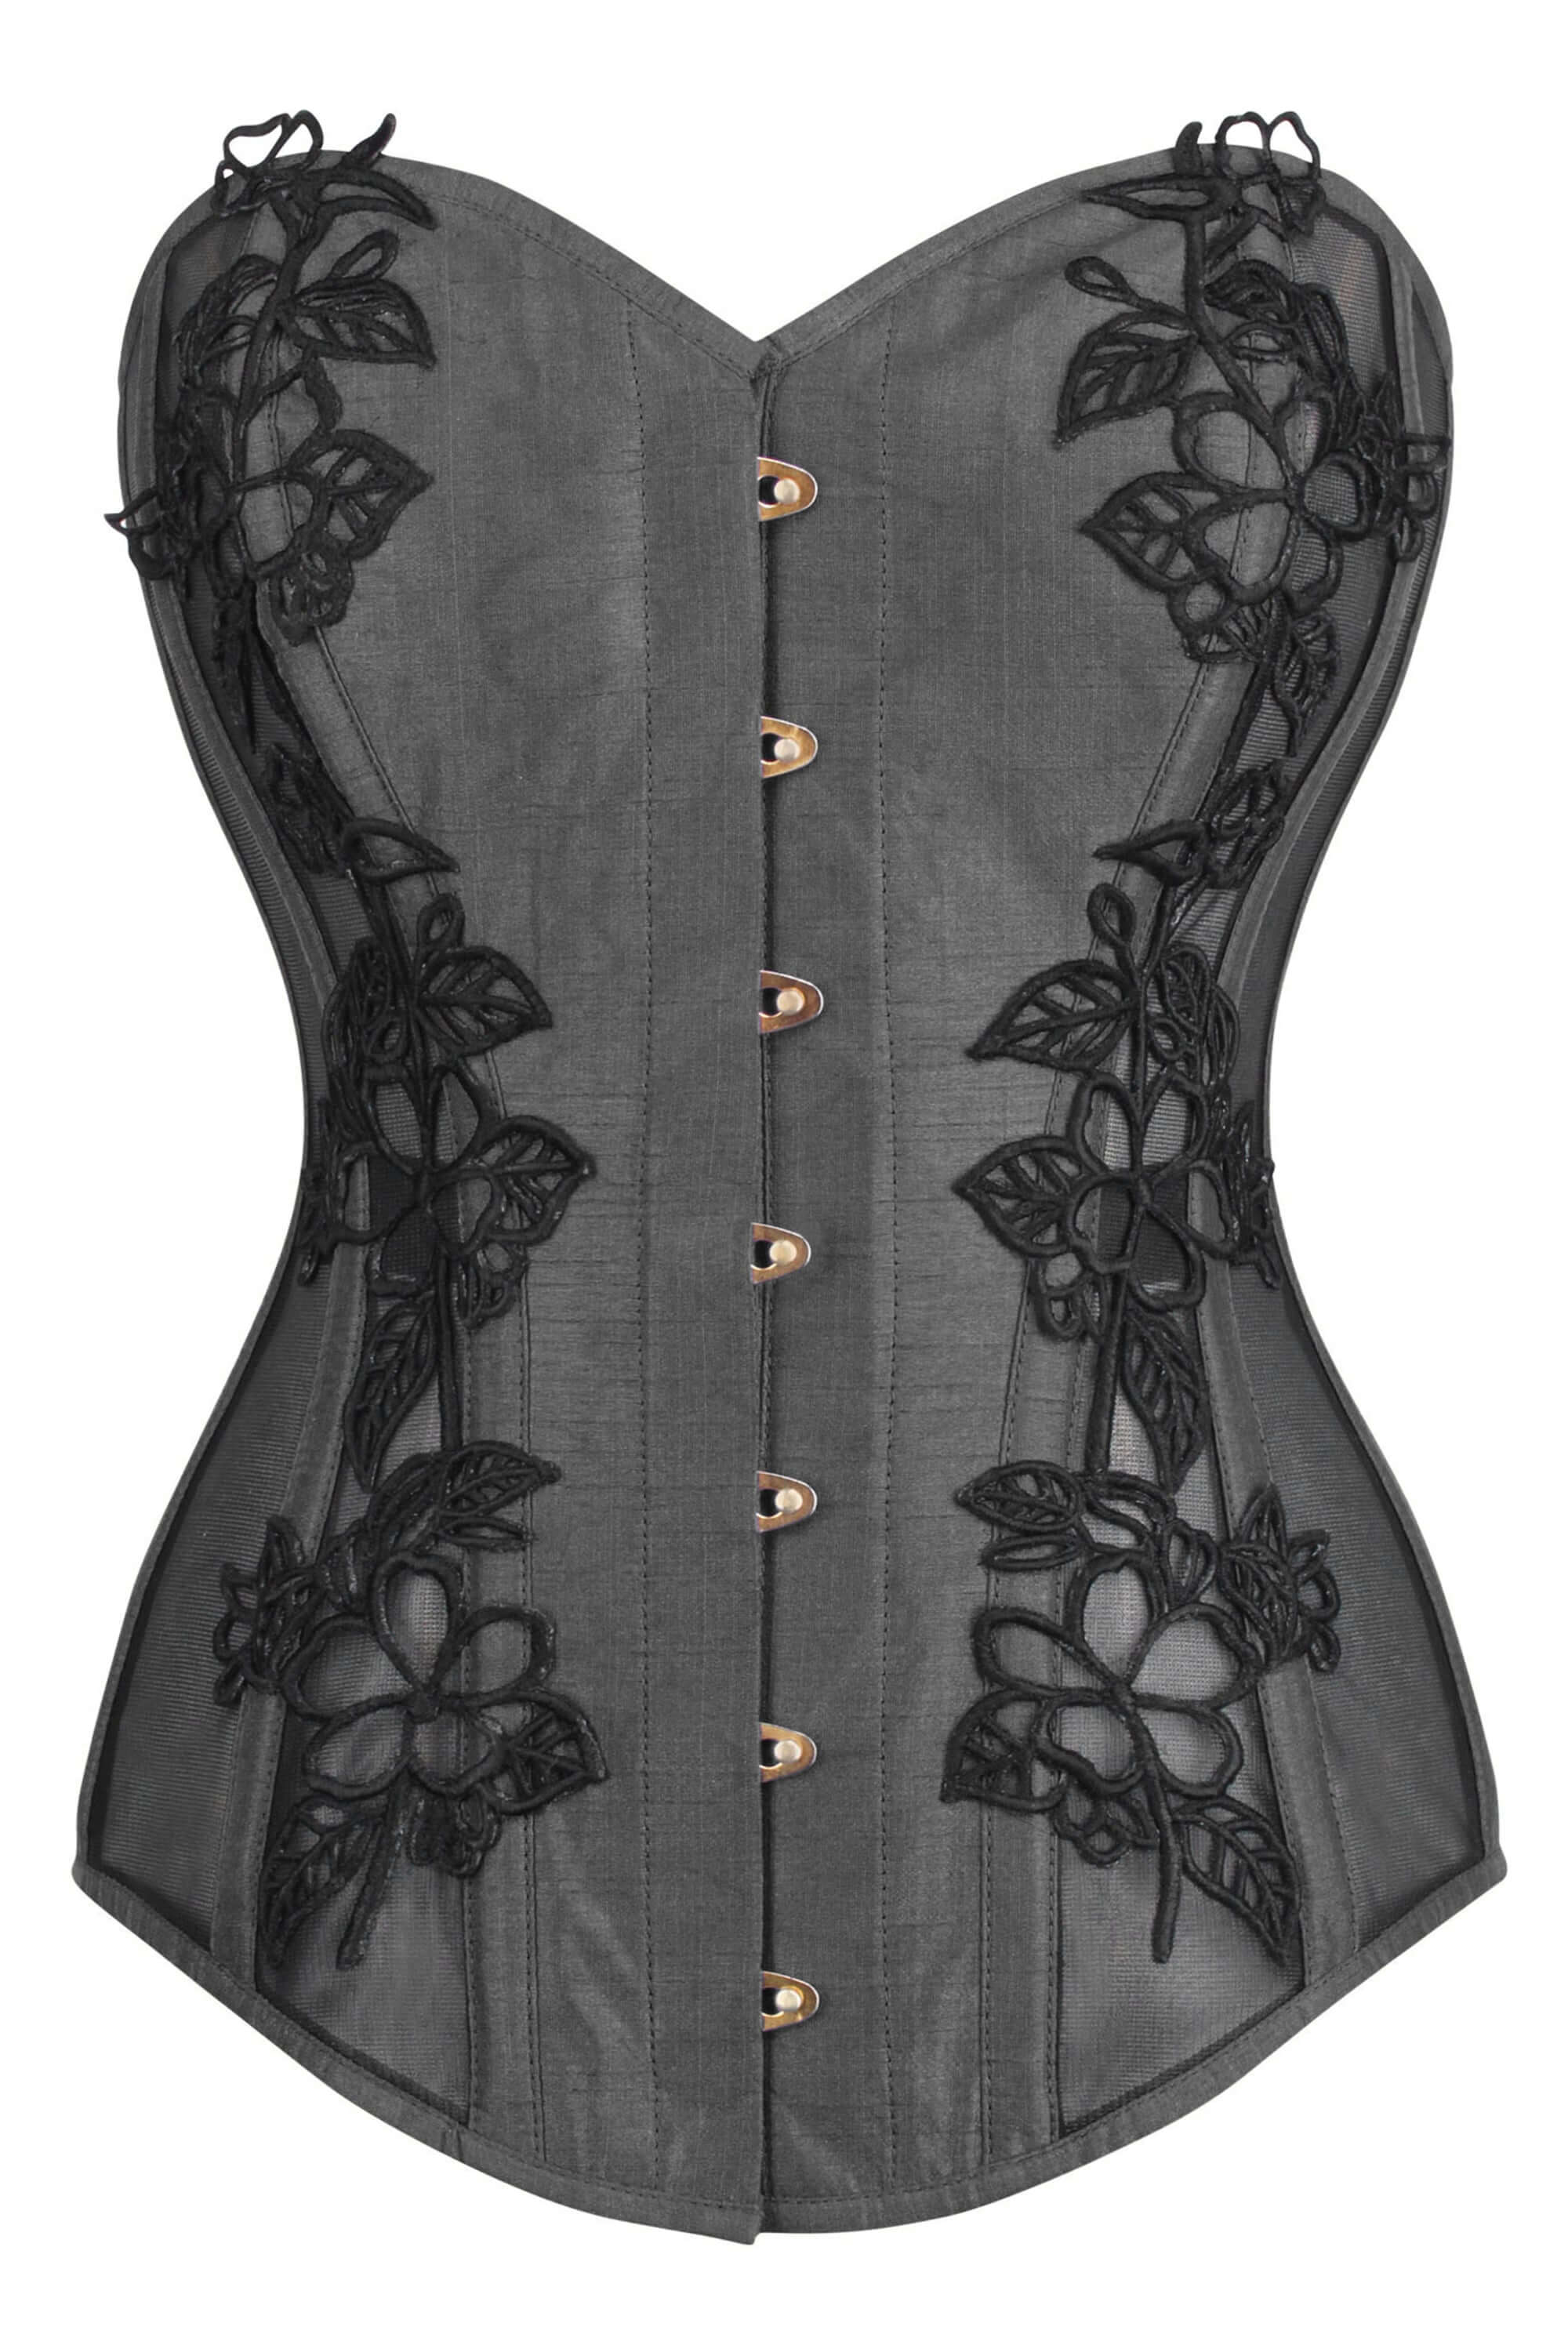 Black Longline Overbust Corset with Black Lace and Mesh Panels